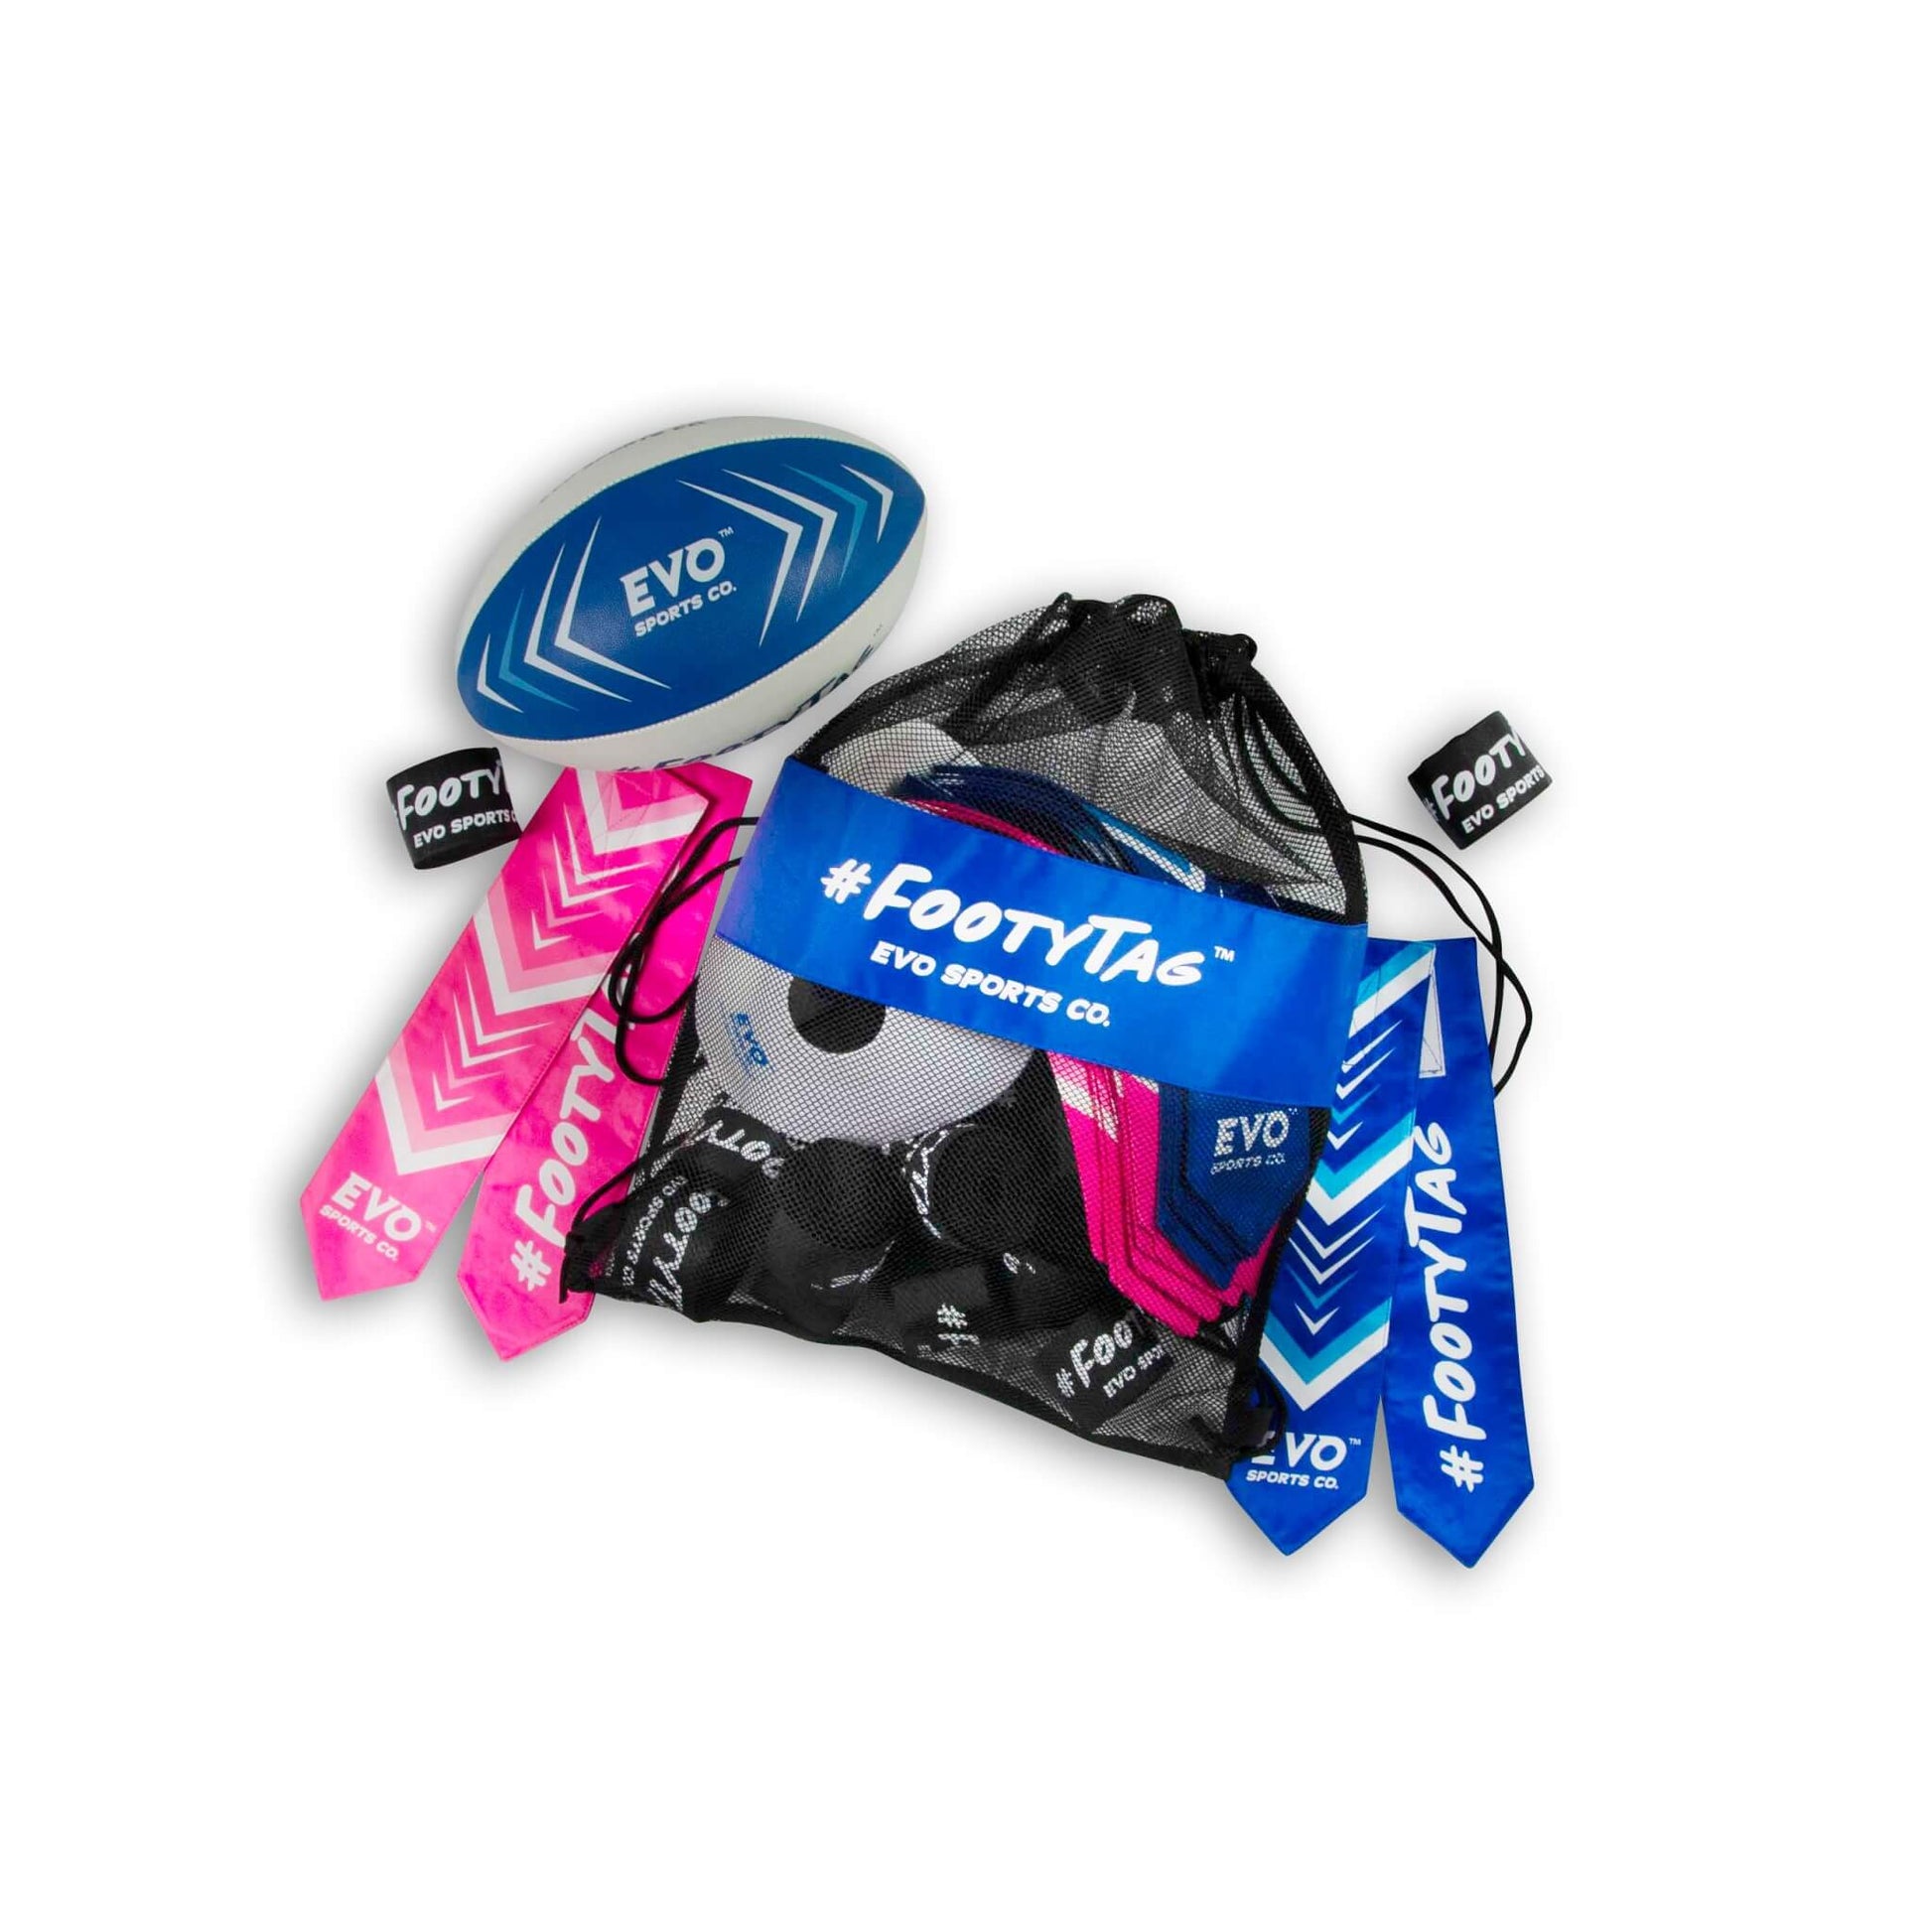 FootyTag - Kids Rugby Tags Kit - 10 Player - Evo Sports Co